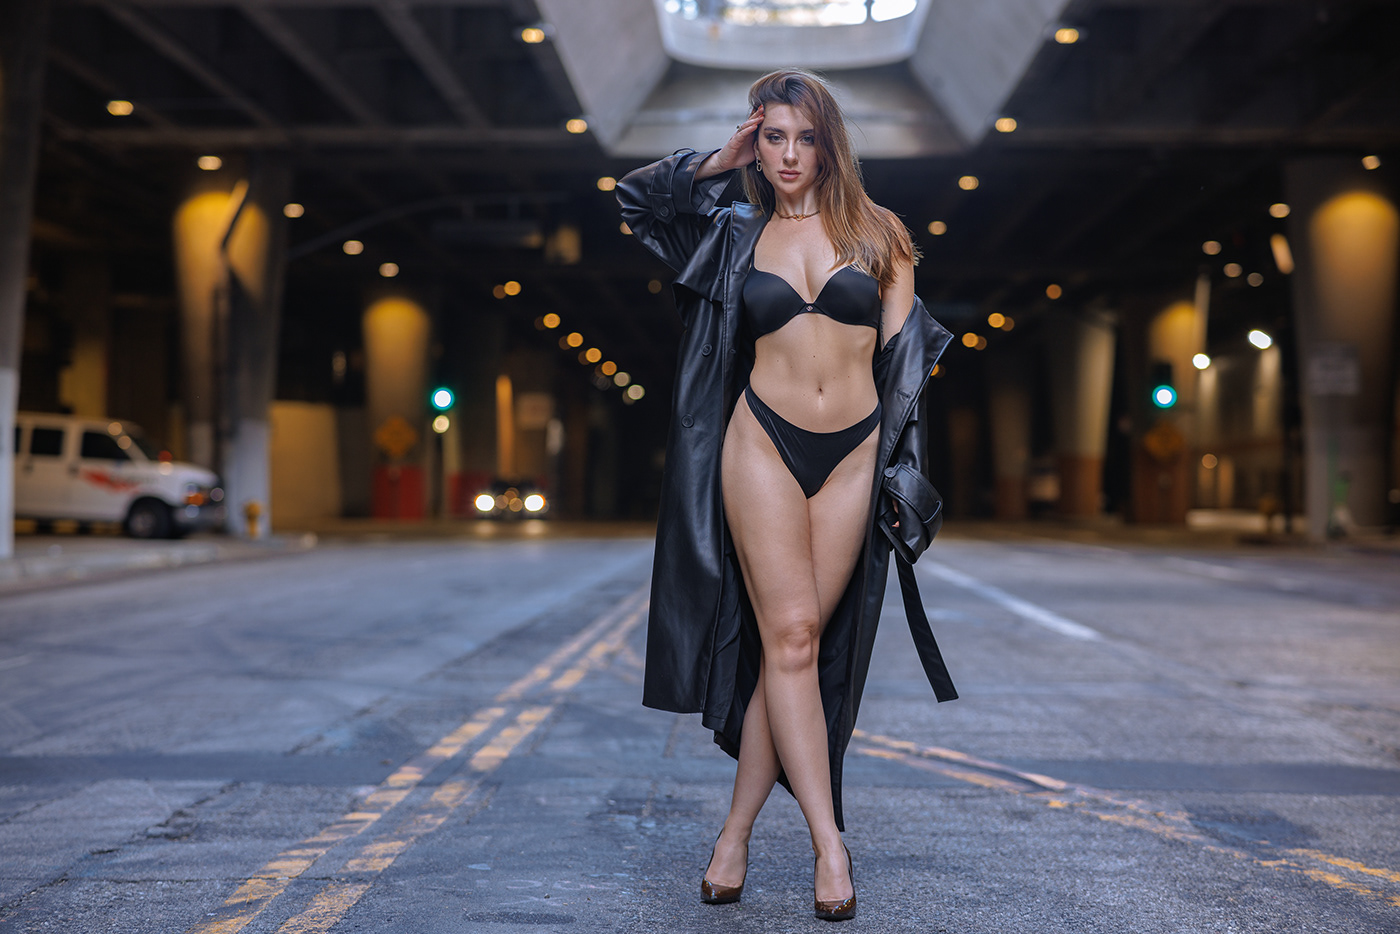 trench coat editorial model glamour beauty Street lingerie sensual